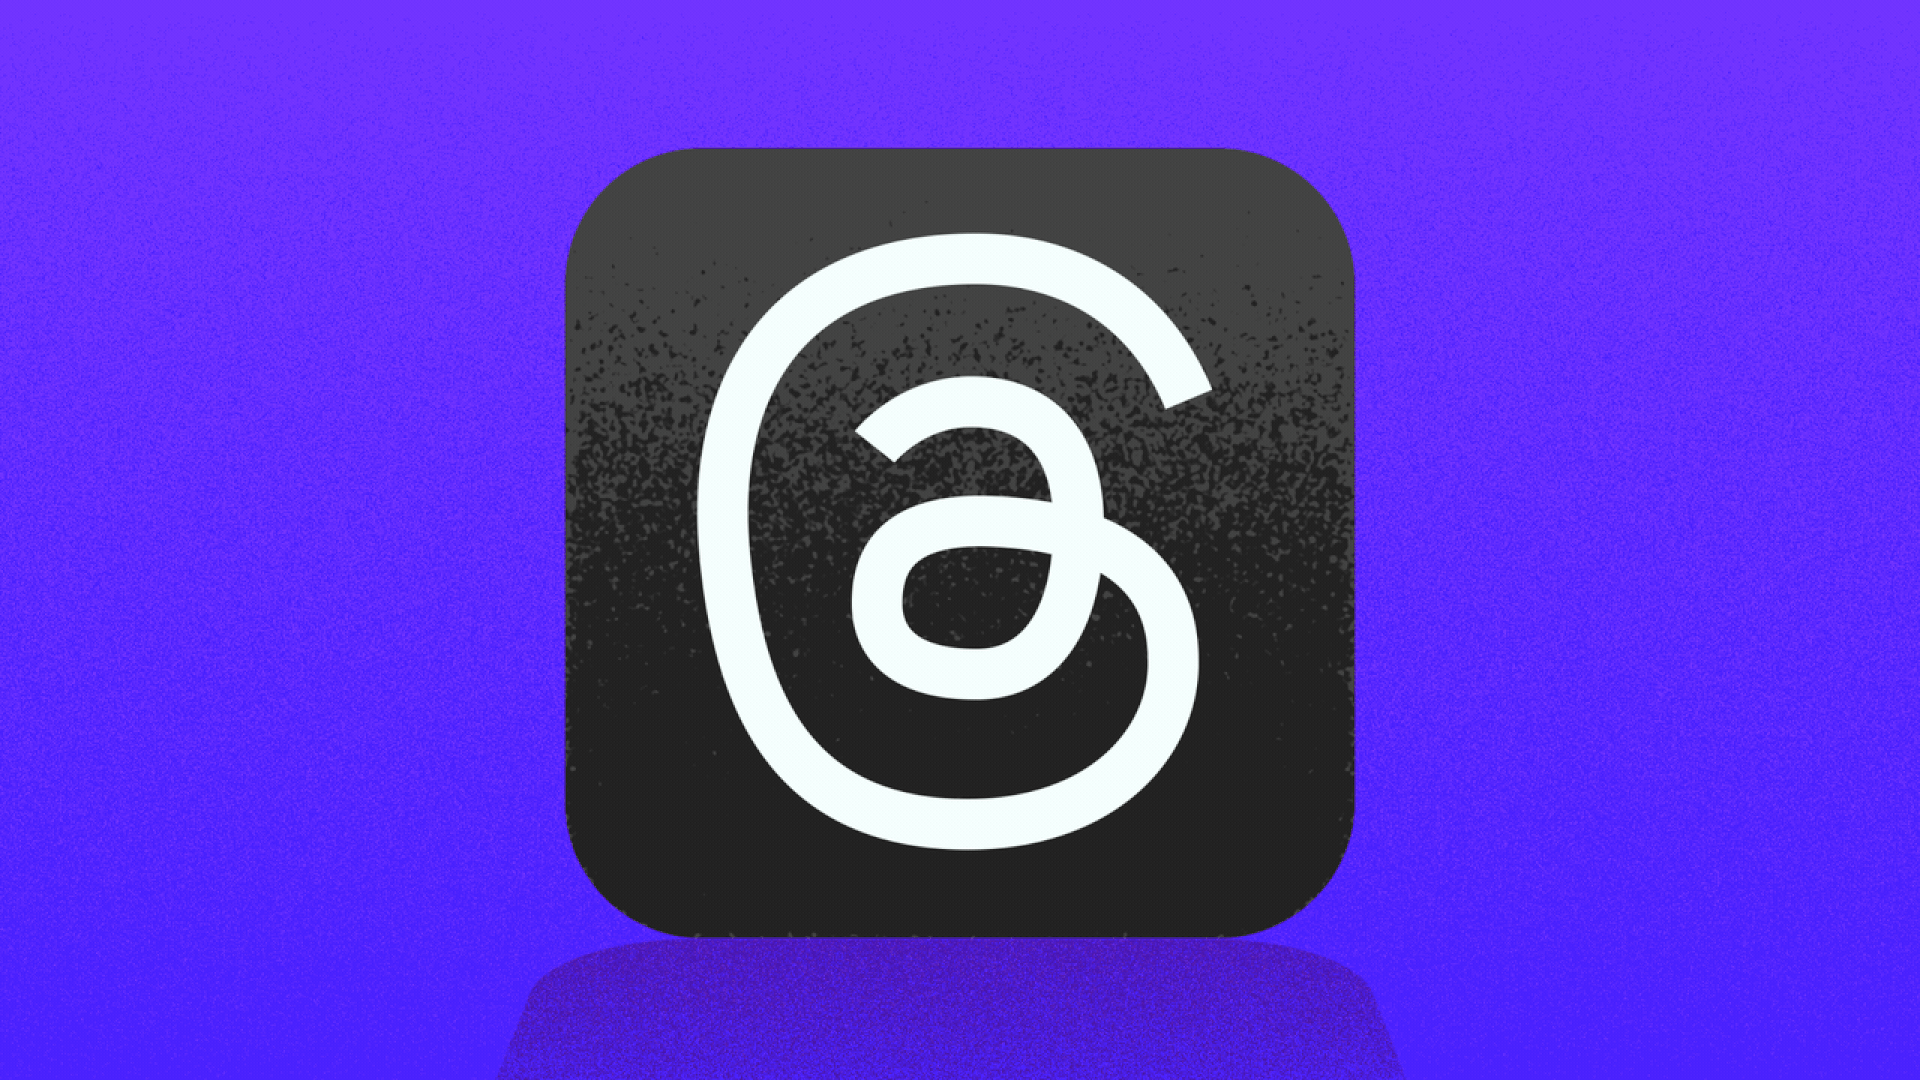 Animated illustration of a Threads app icon with the logo changing into a question mark.